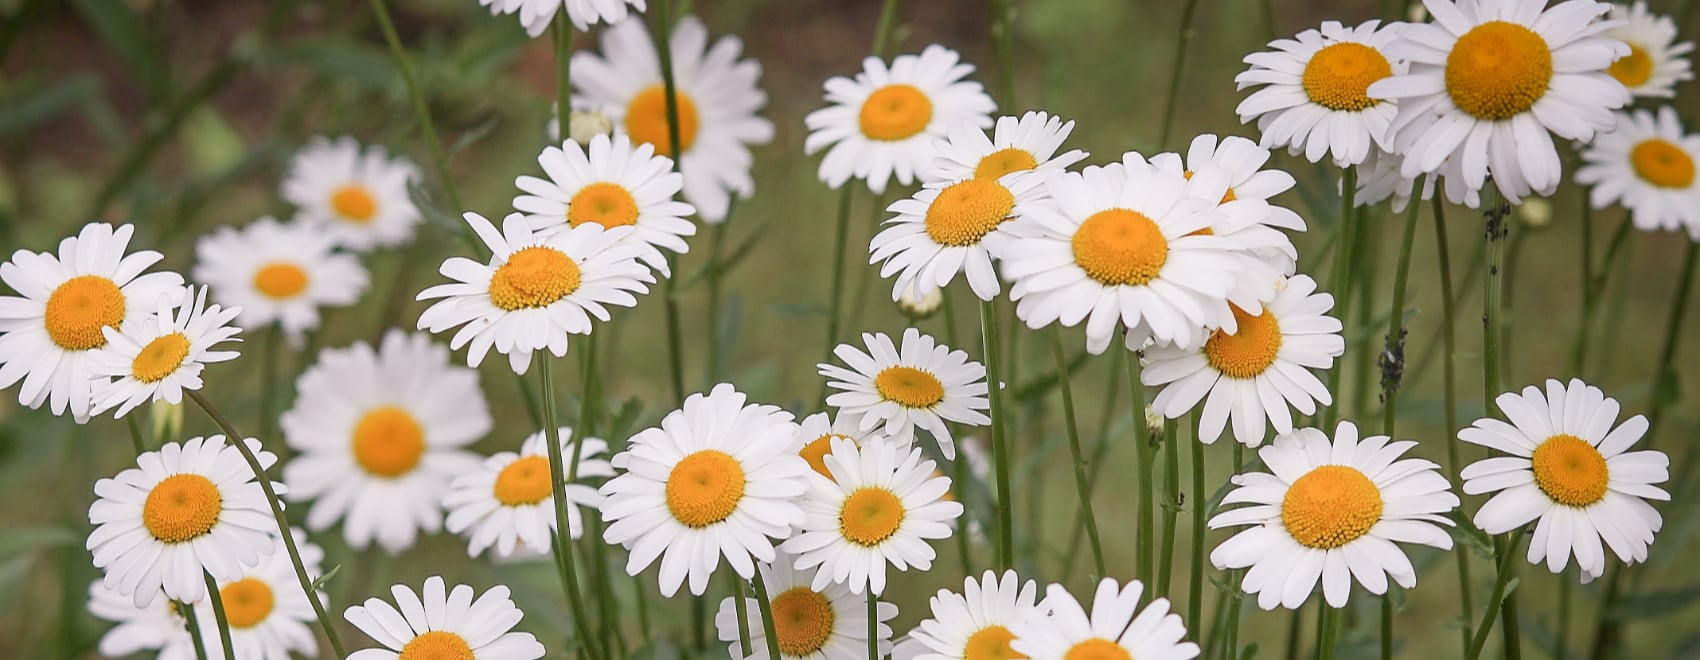 12 Best Types Of Daisies How To Grow And Care For Daisies